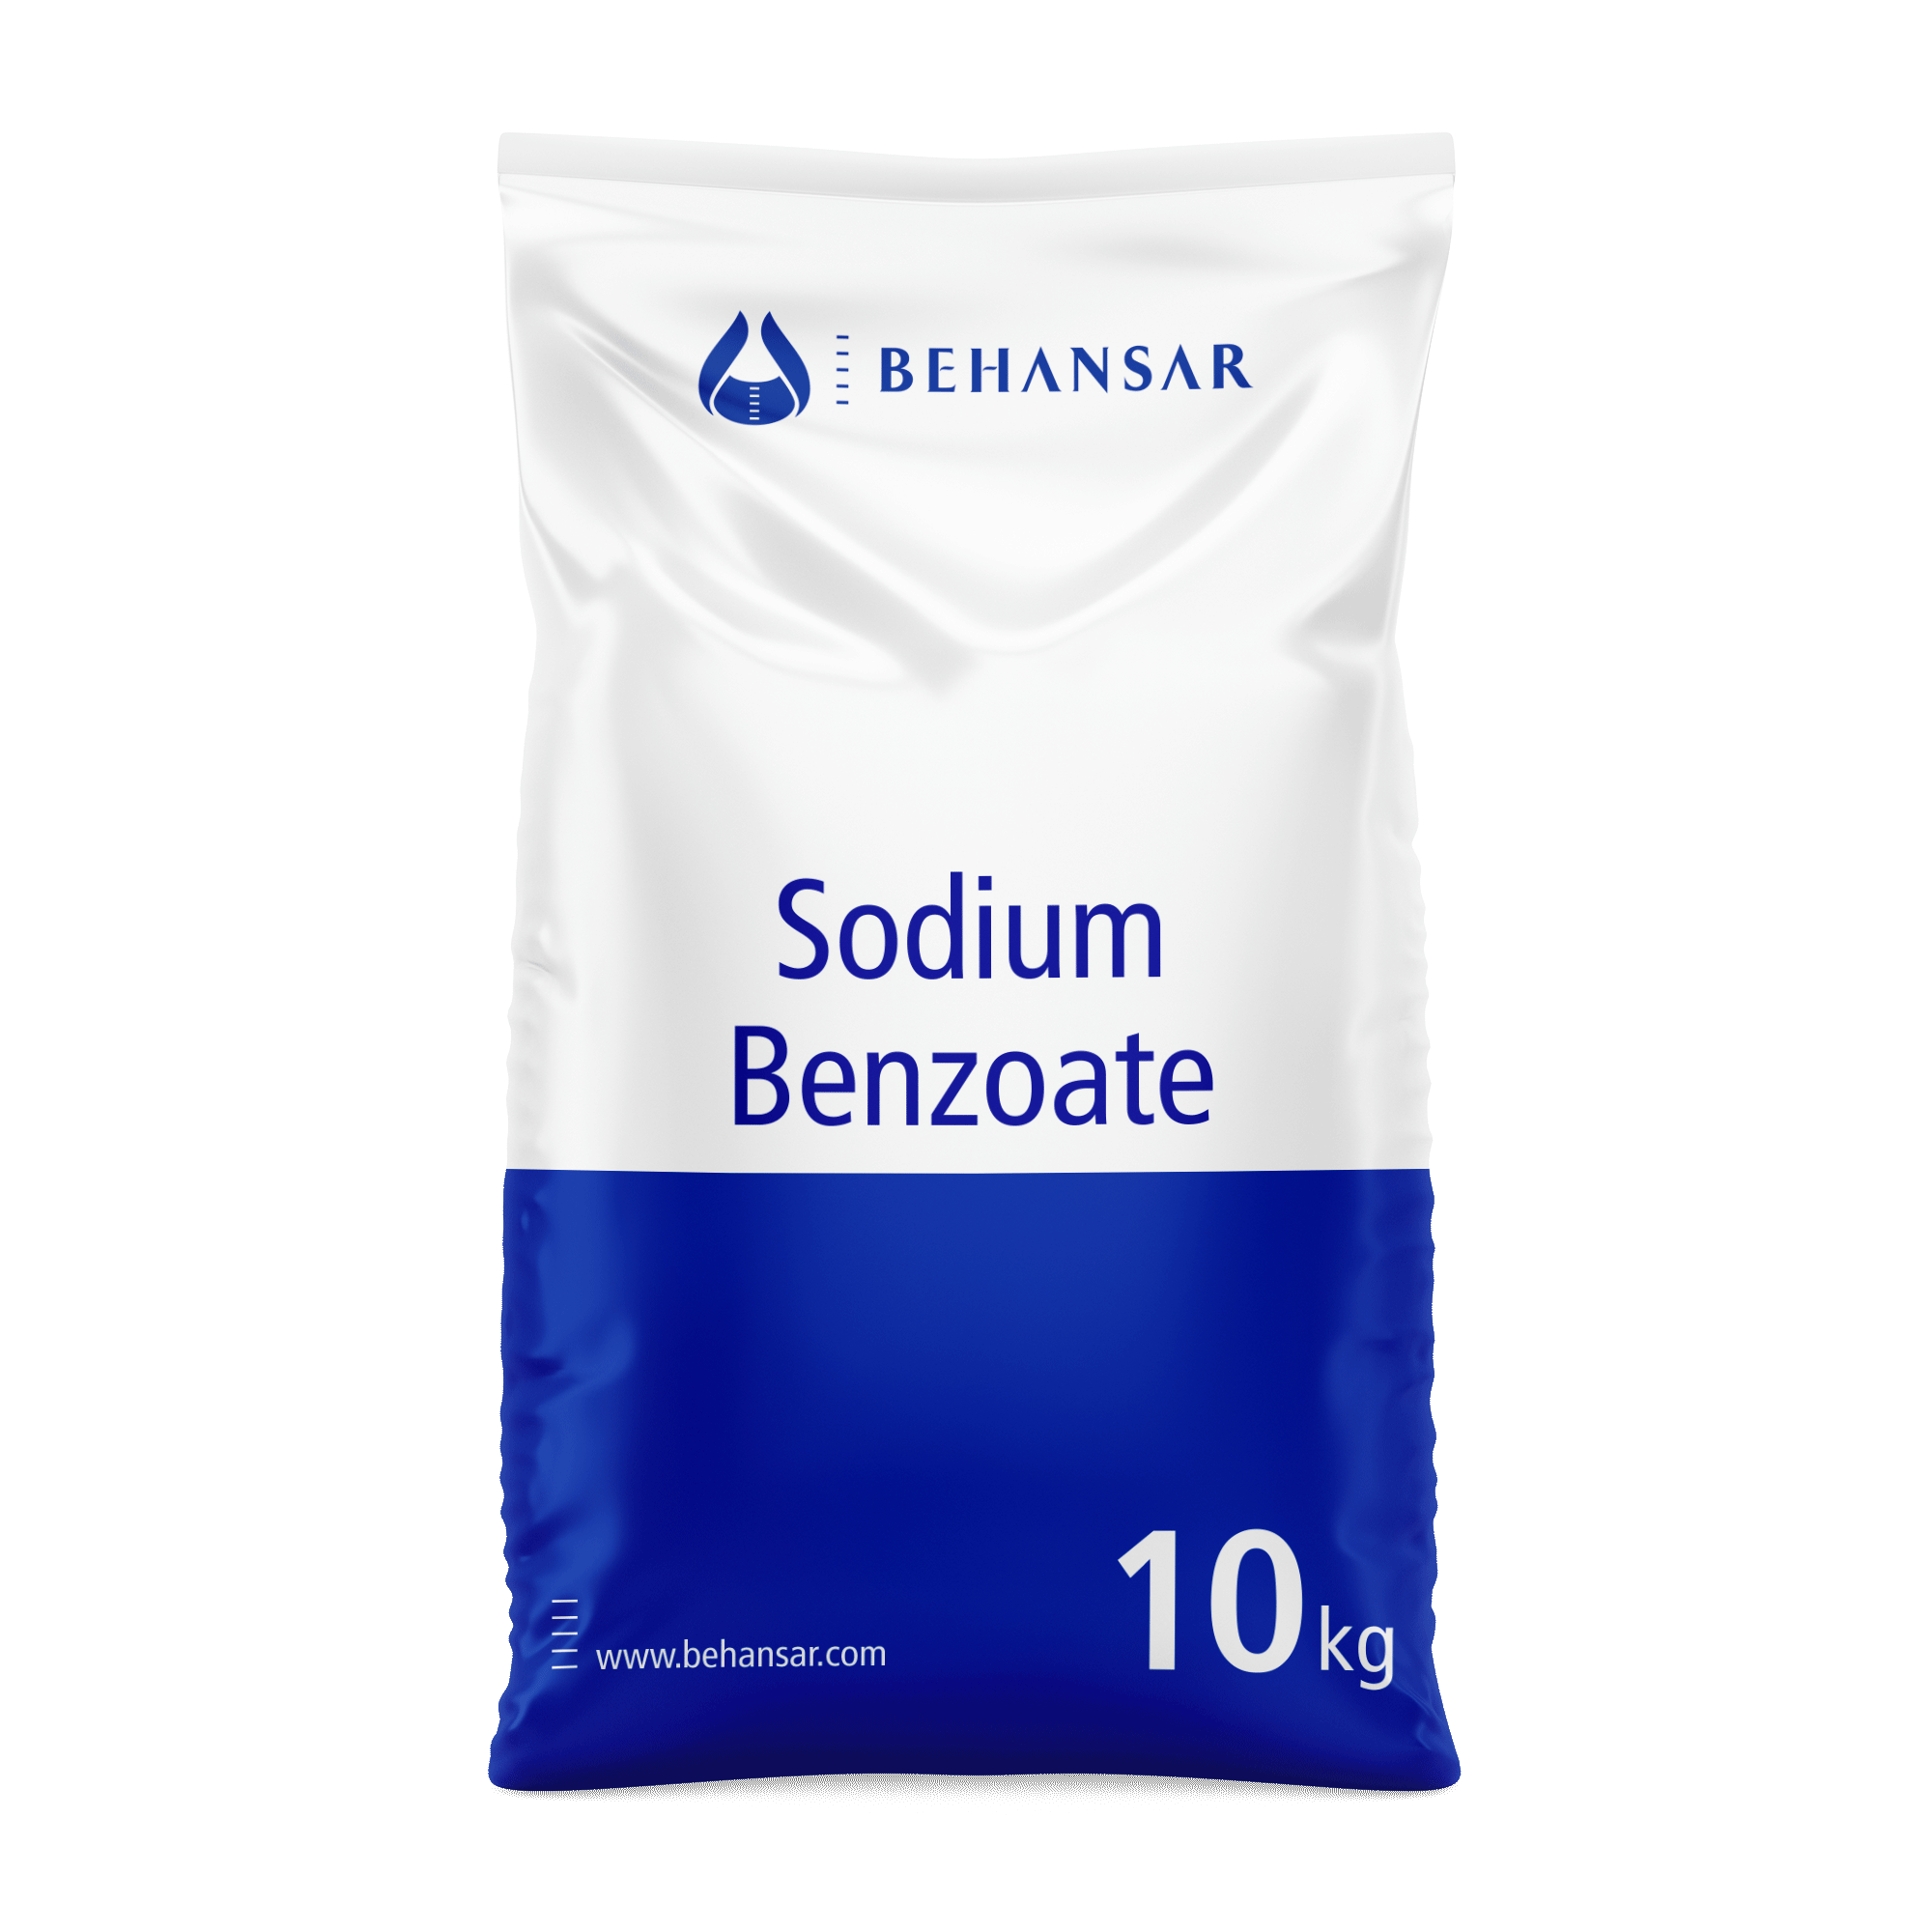 Sodium Benzoate is one of the products of Behansar Co